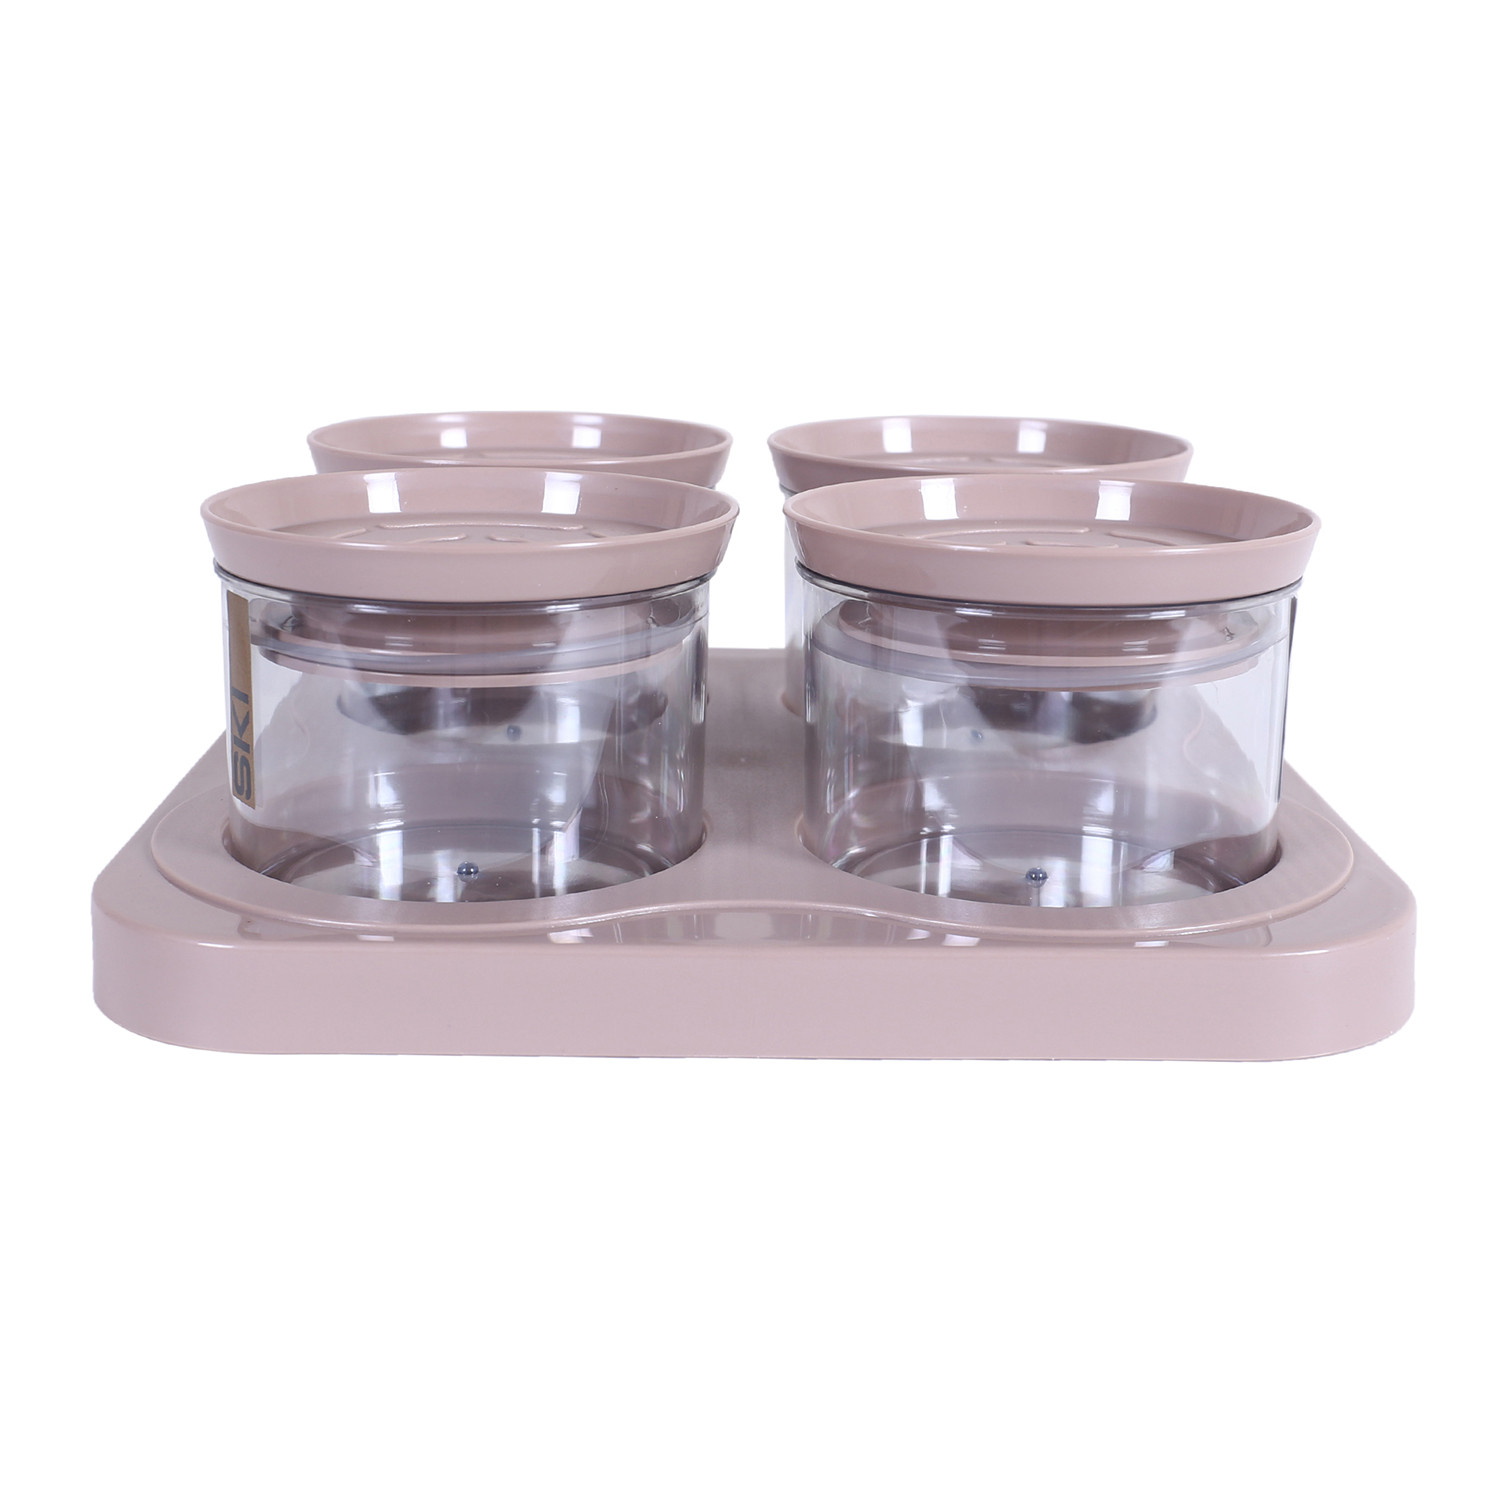 Kuber Industries 4 Containers & Tray Set|Unbreakable Plastic Snackers,Cookies,Nuts Serving Tray|Airtight Containers with Lid,350 ml (Peach)